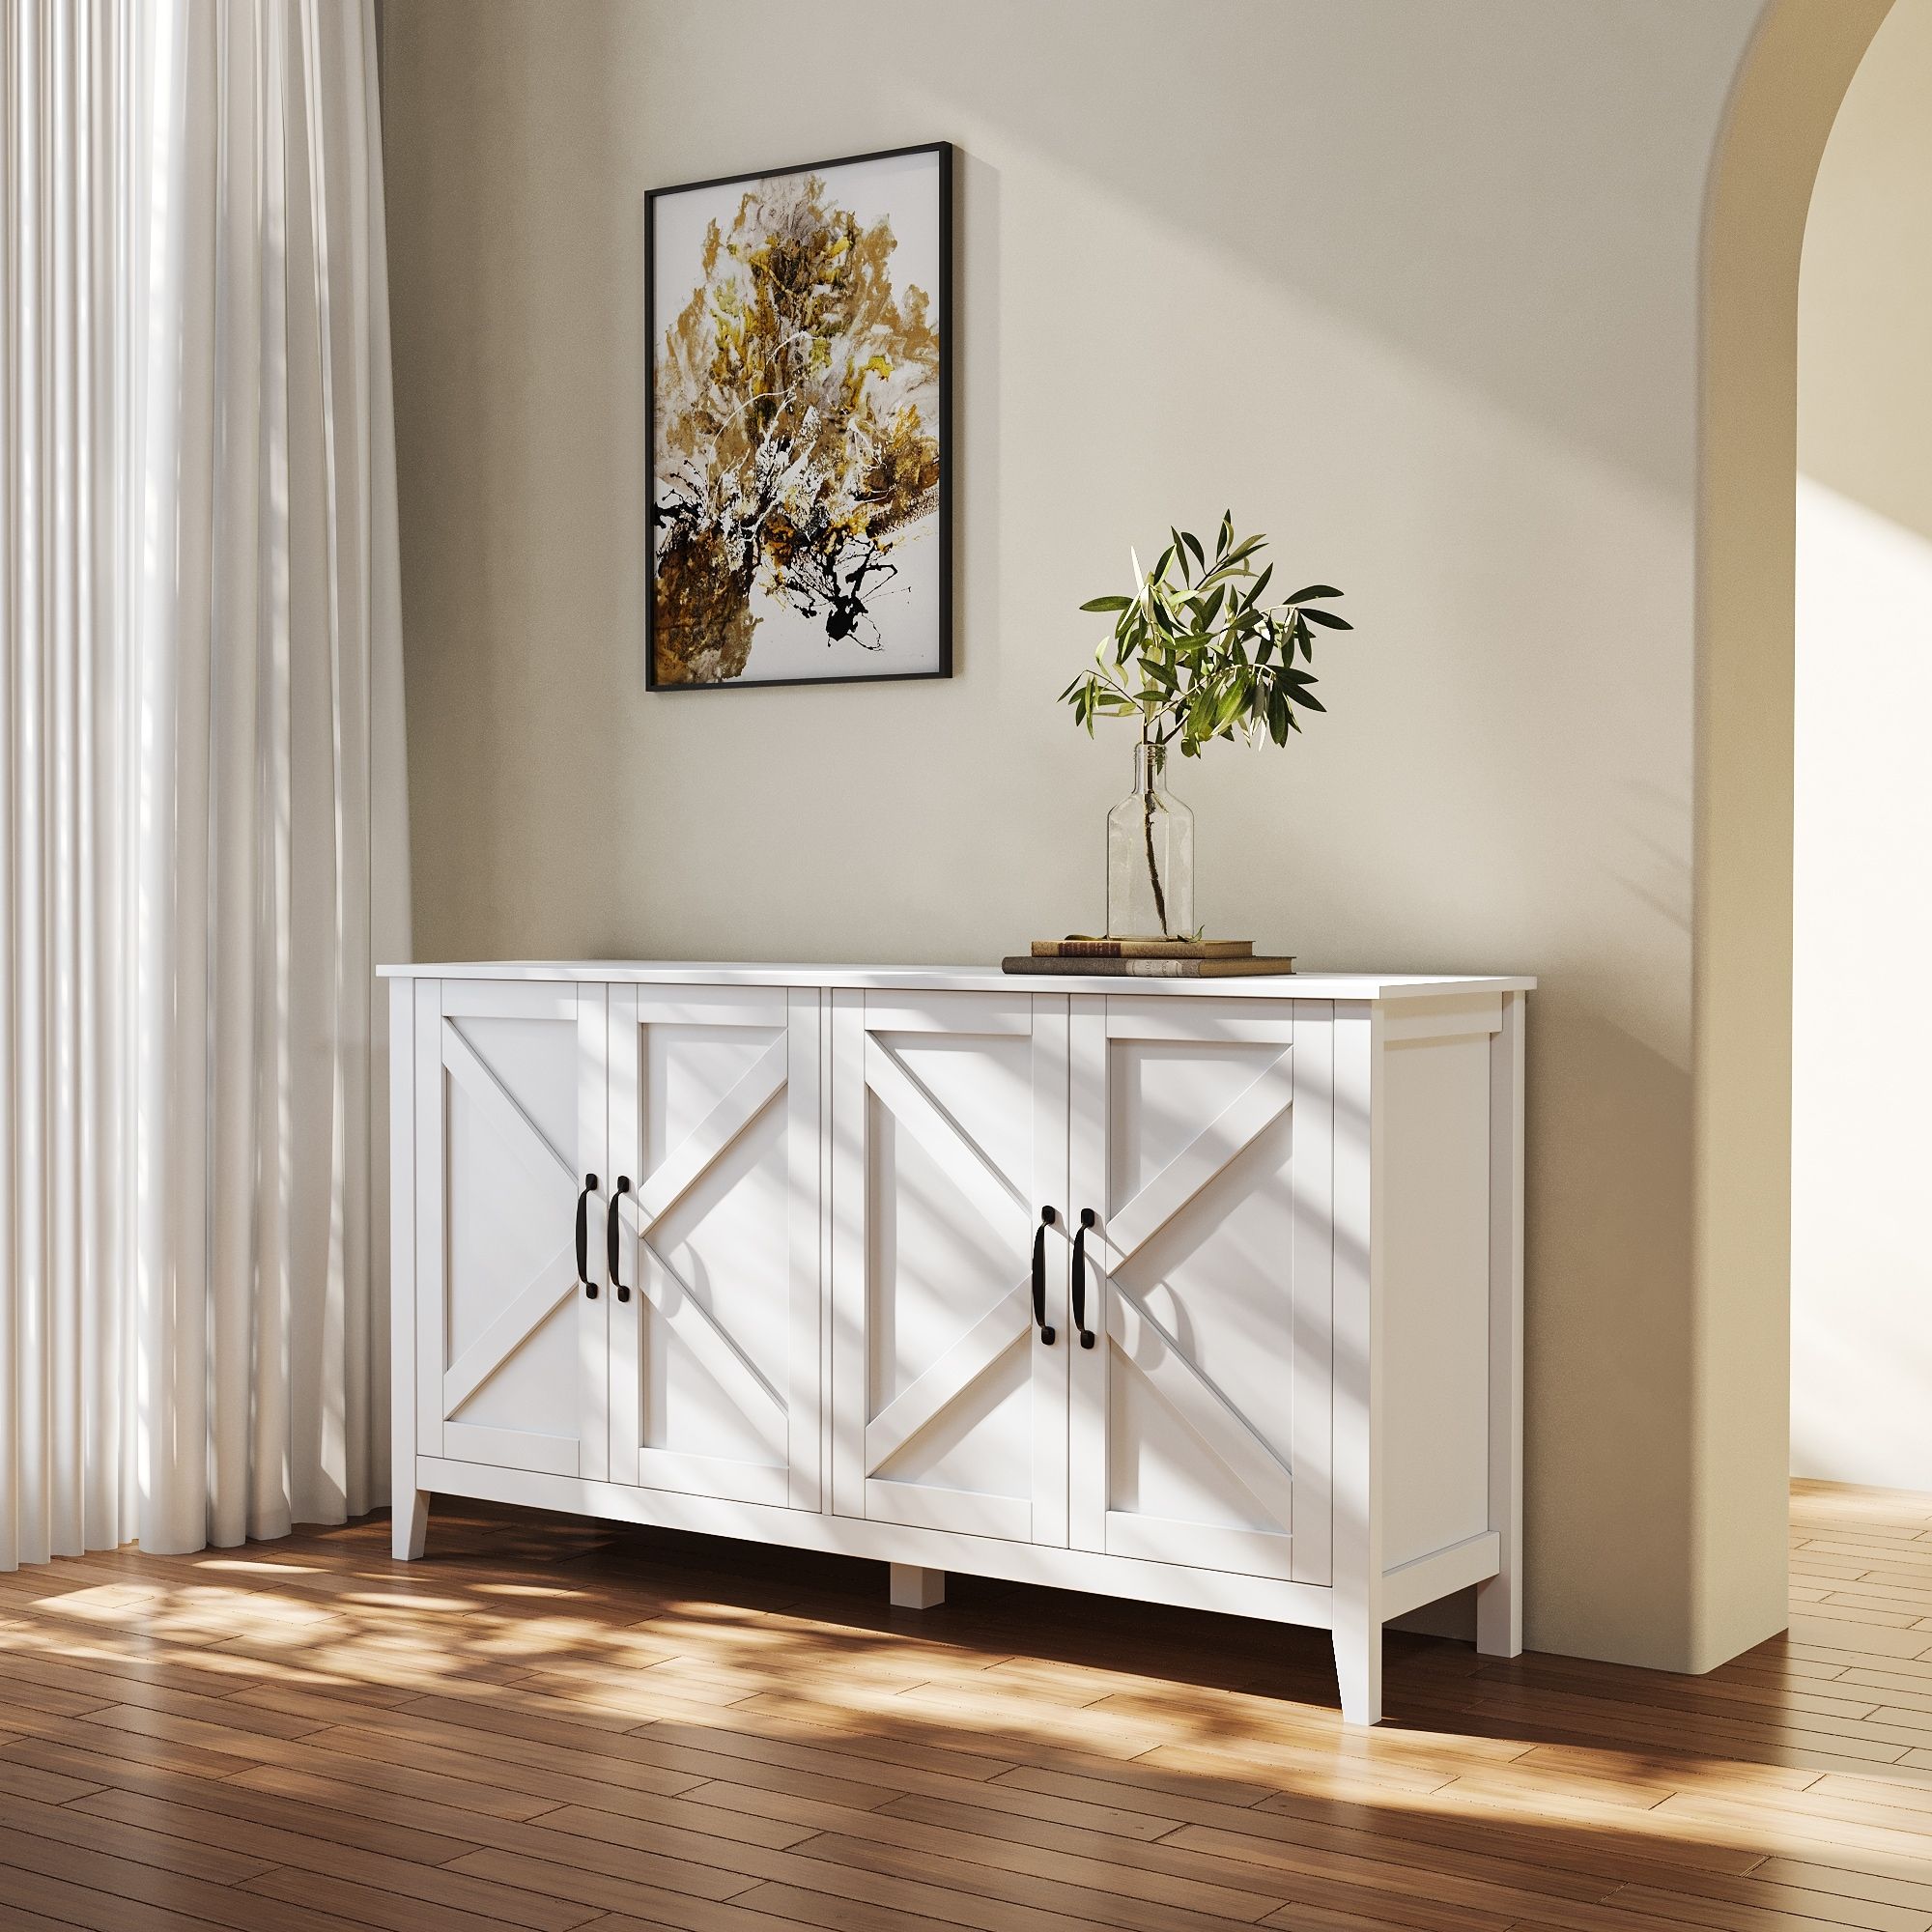 Sideboard Storage Entryway Floor Cabinet With 4 Shelves – Bed Bath & Beyond  – 37068169 Inside 2018 Sideboards For Entryway (Photo 7 of 15)